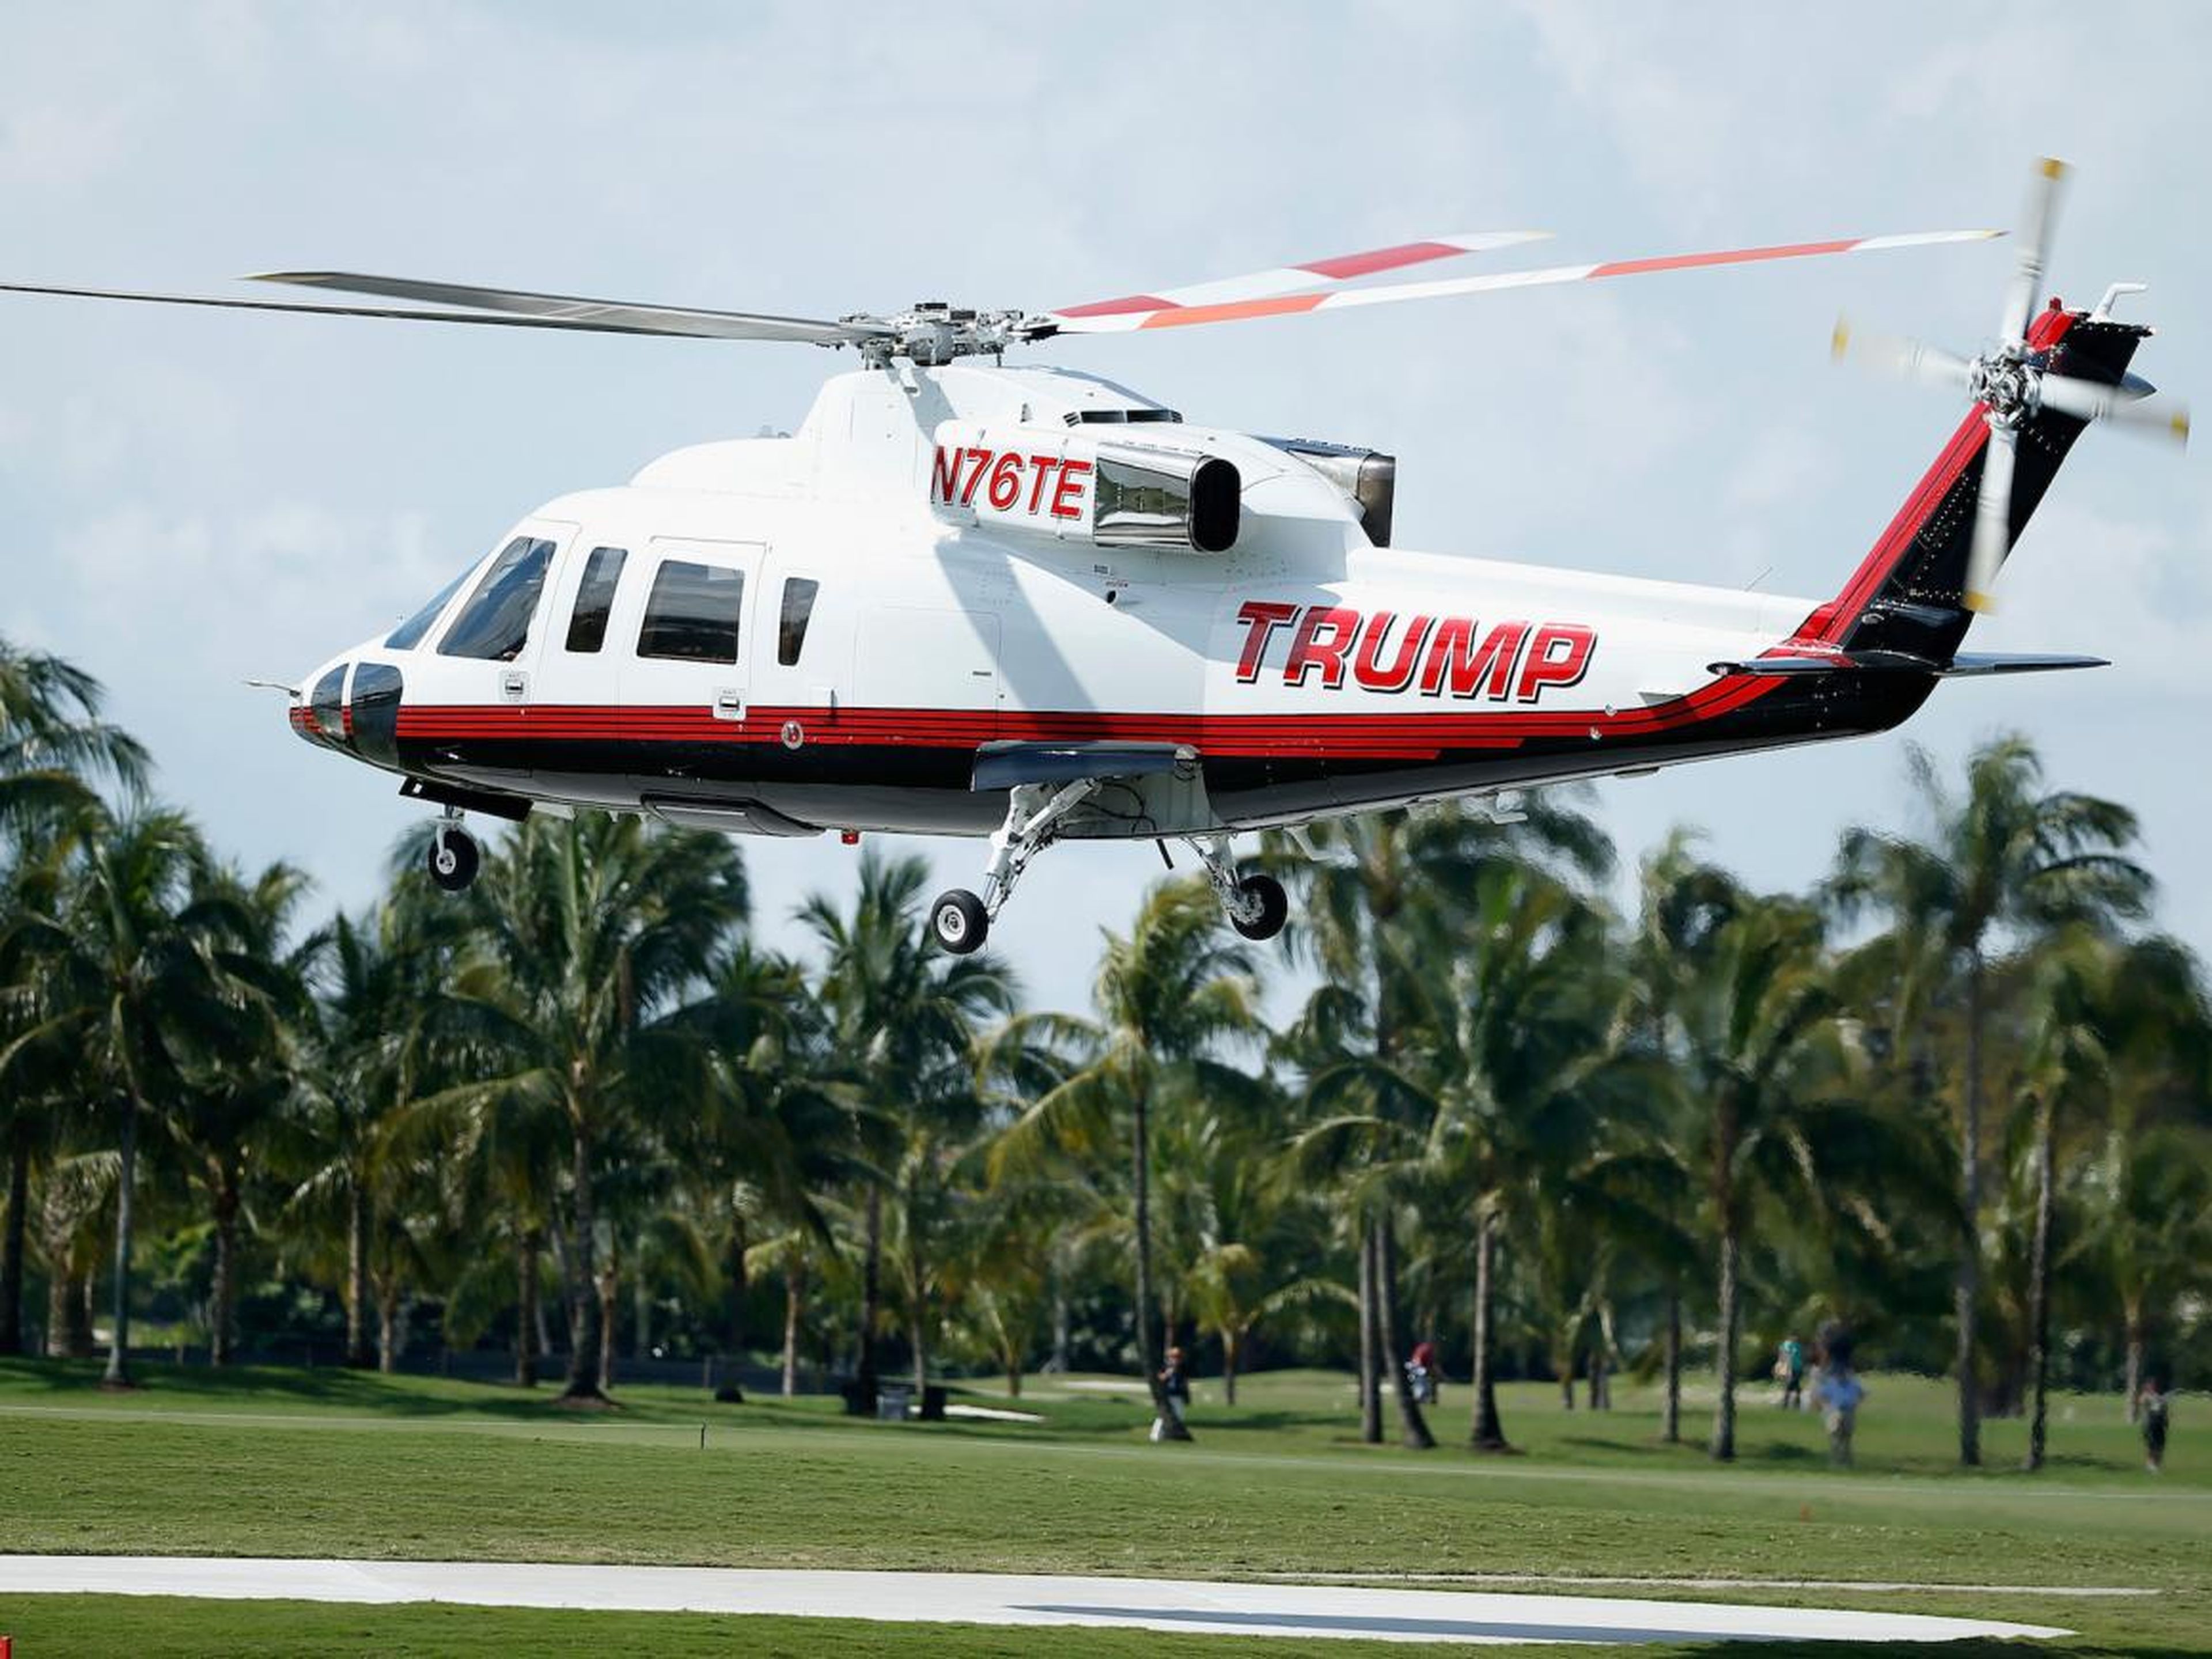 And that's not to mention his three Sikorsky helicopters. Pre-owned Sikorsky S-76s typically sell for $5 million to $7 million — not counting the estimated $750,000 Trump spent redoing the interior of his most recent purchase,